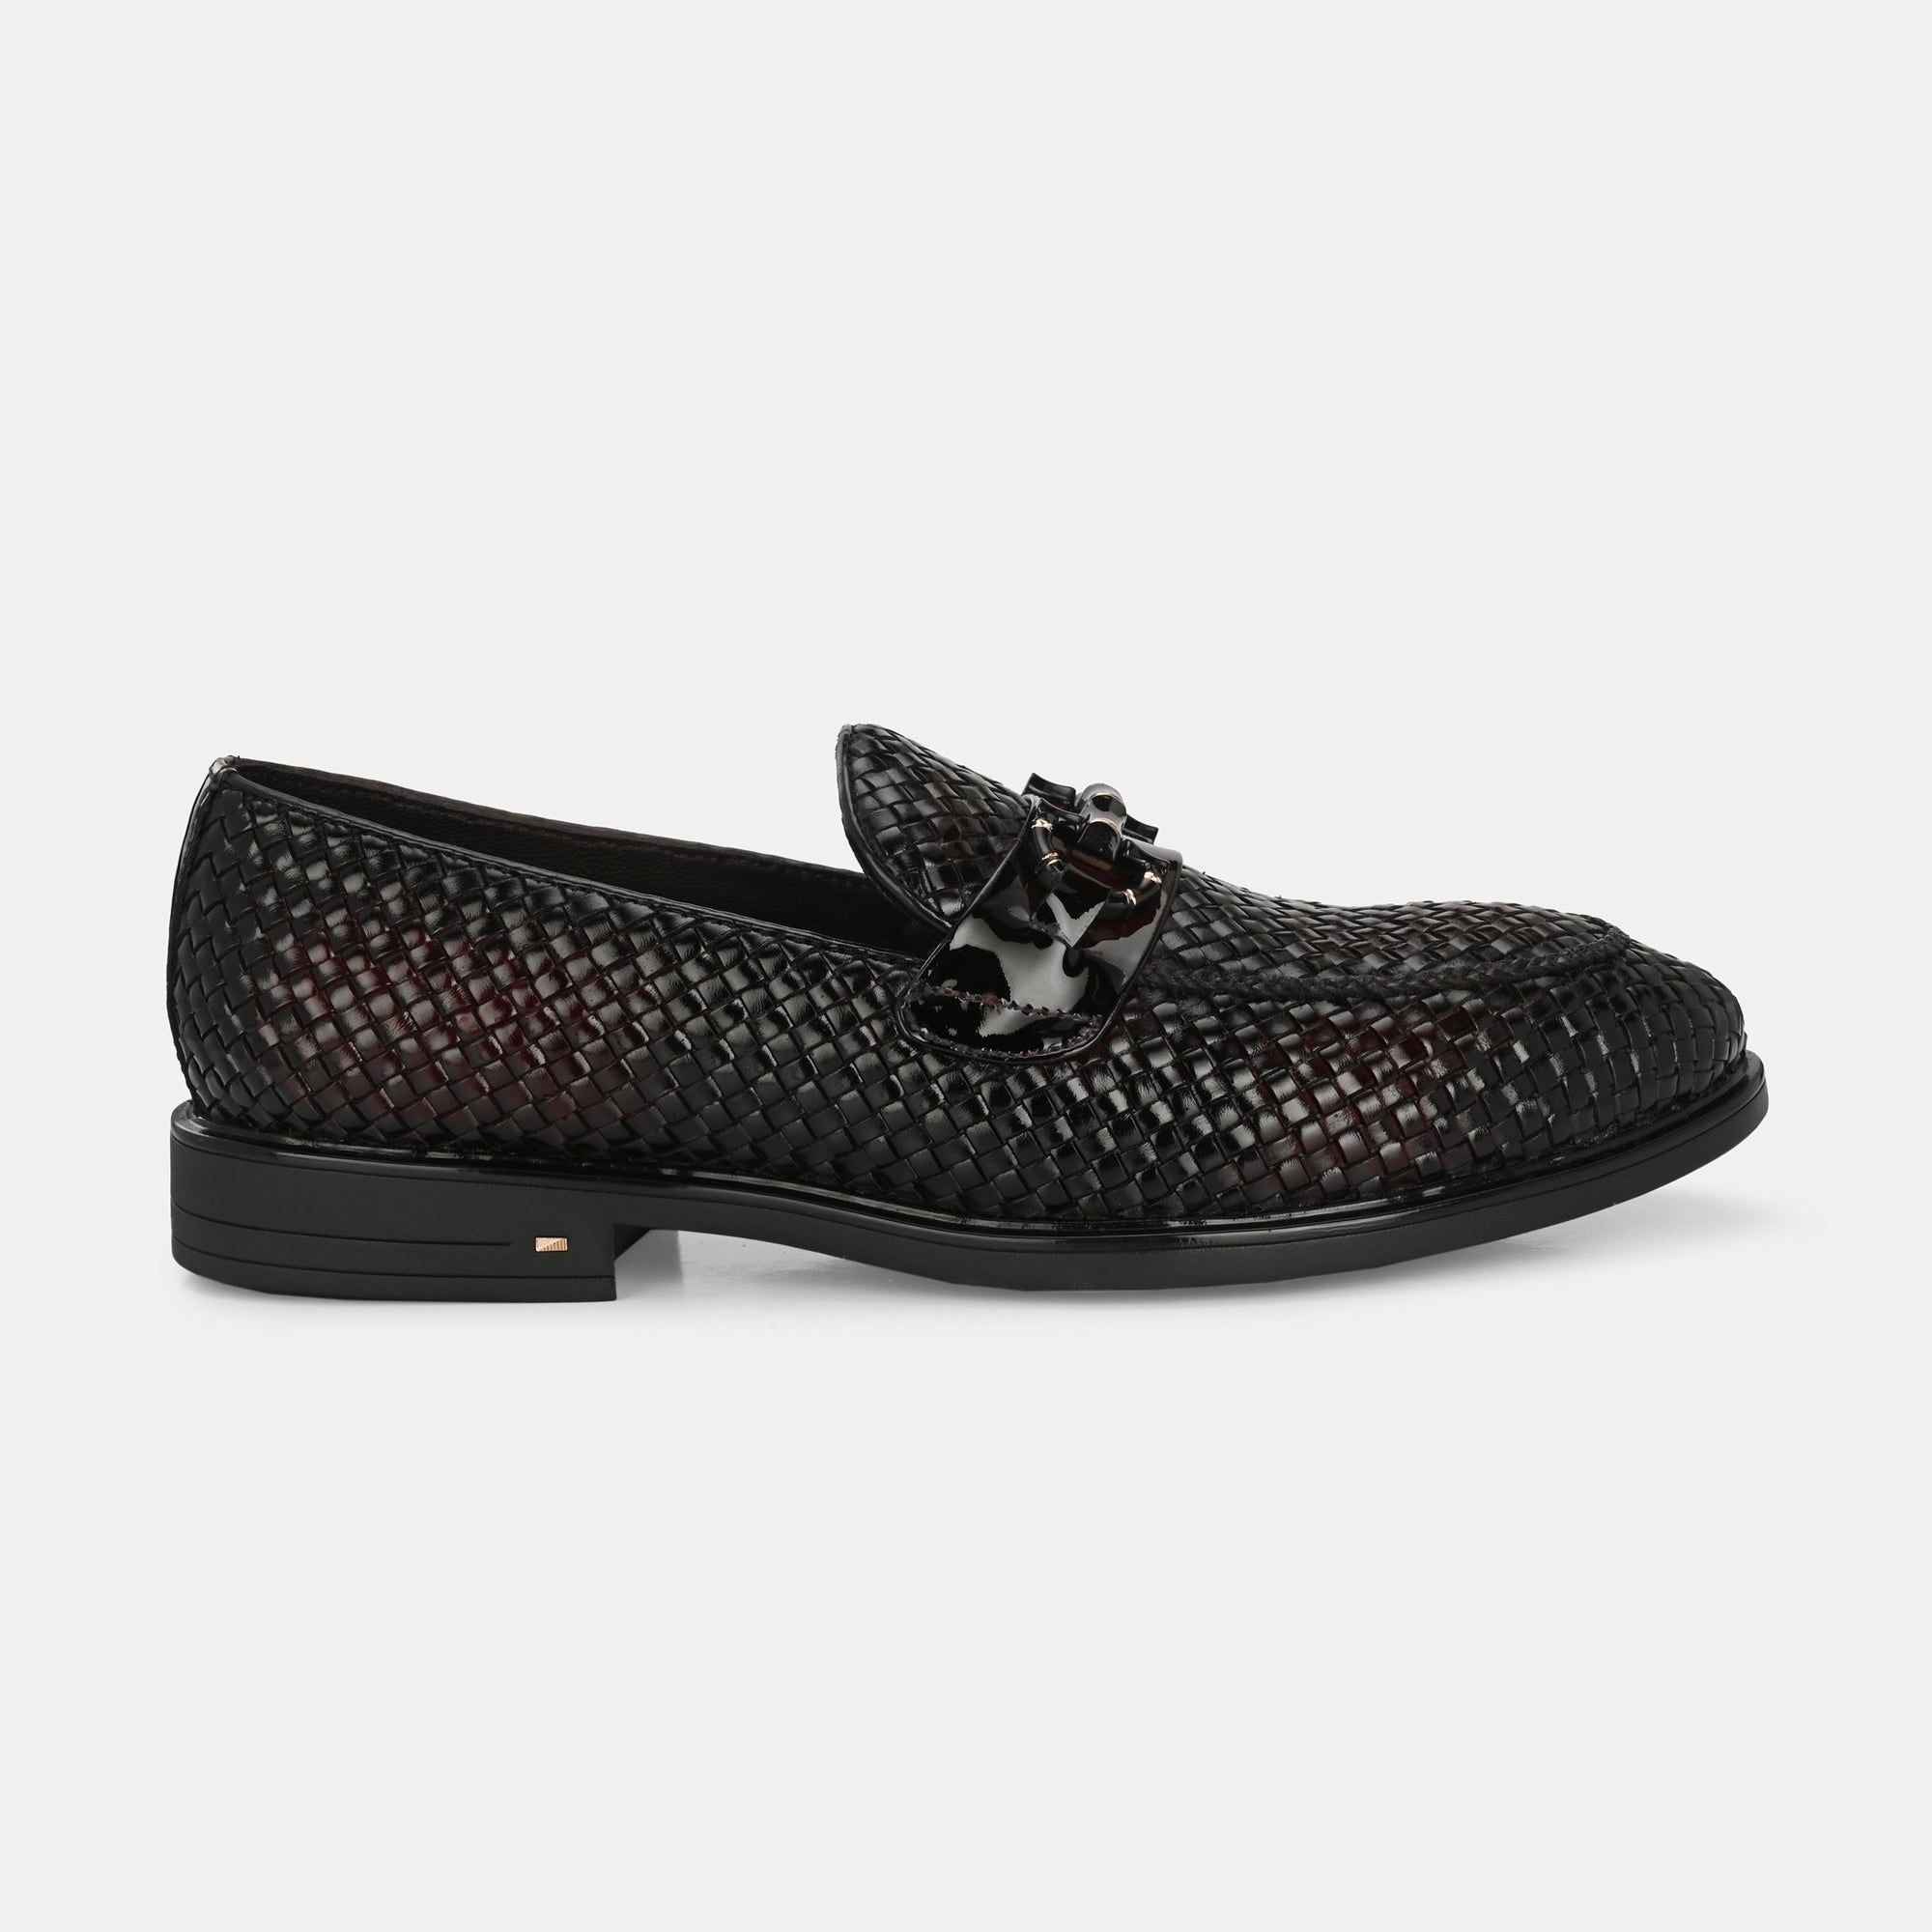 Hand-Woven Buckled Loafers by Lafattio